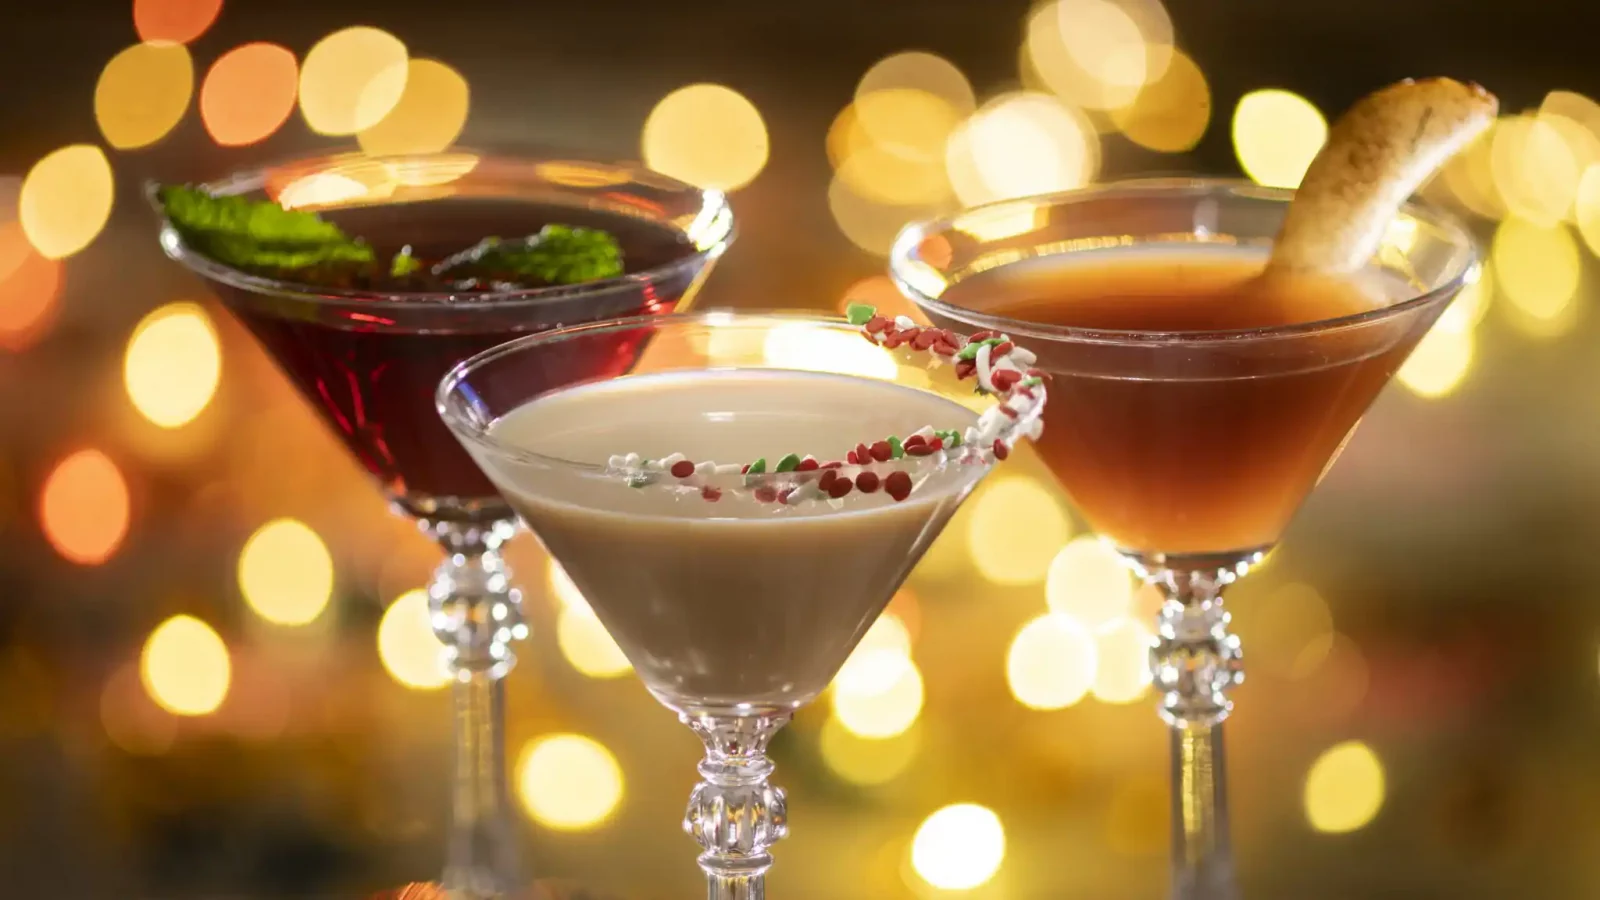 Jollywood Nights trio of holiday cocktails